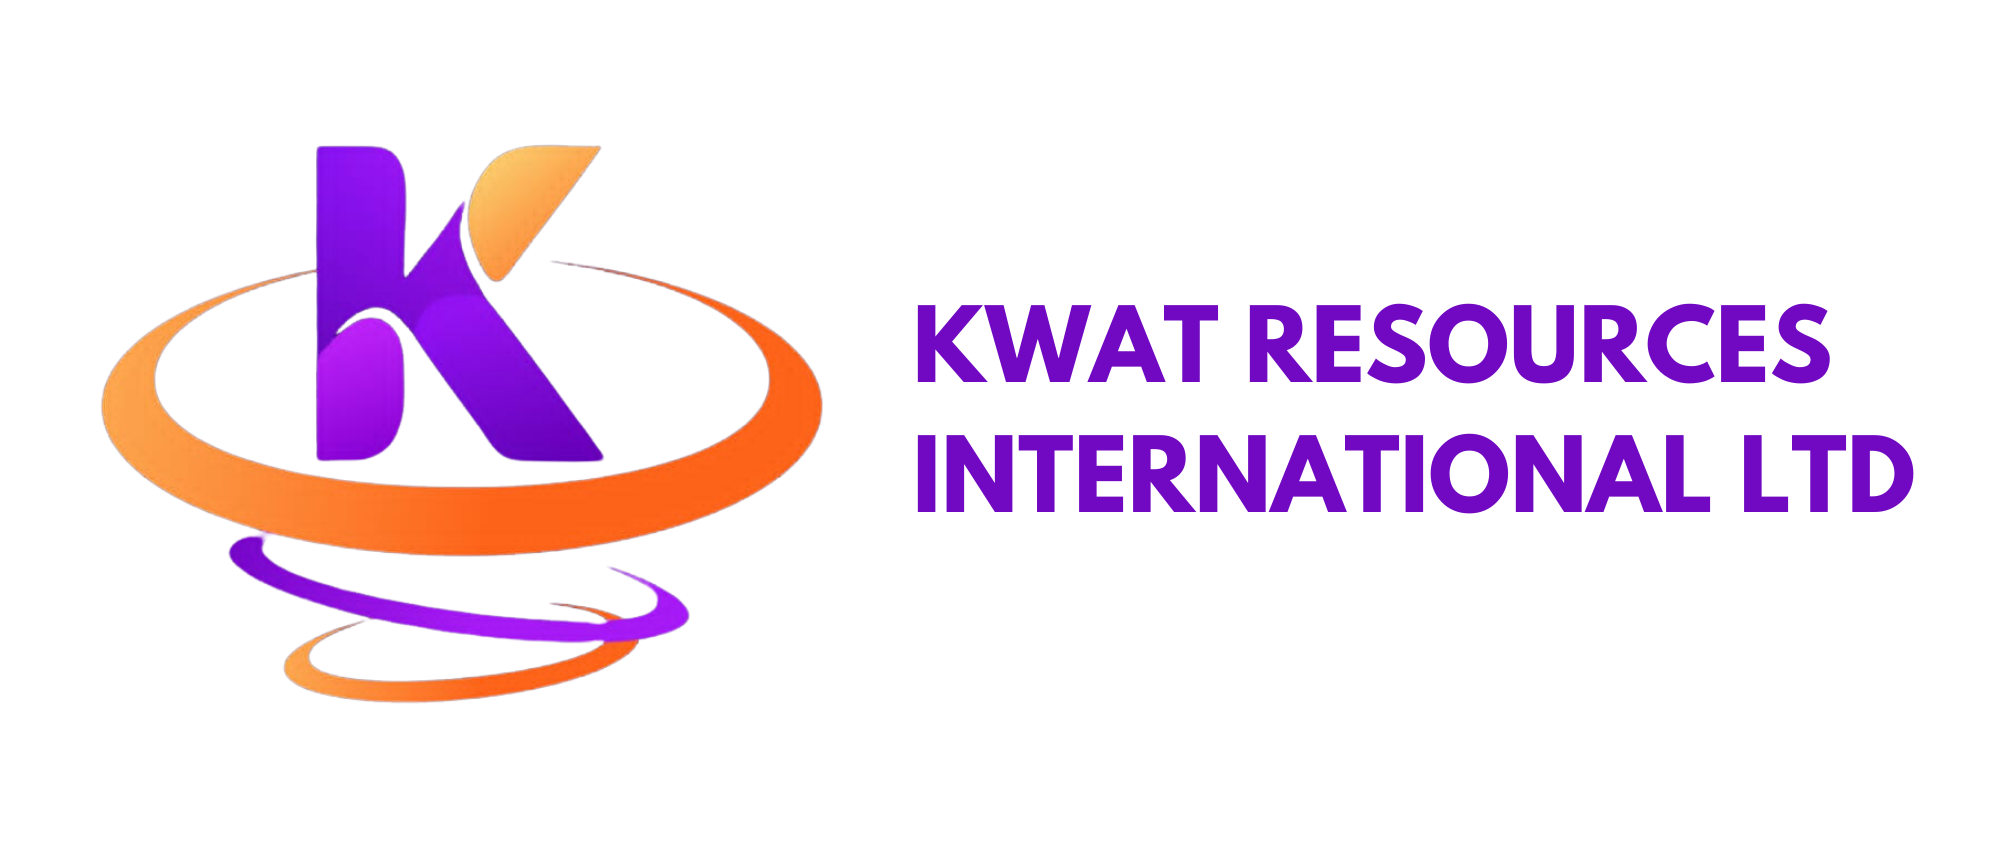 Kwat Resources